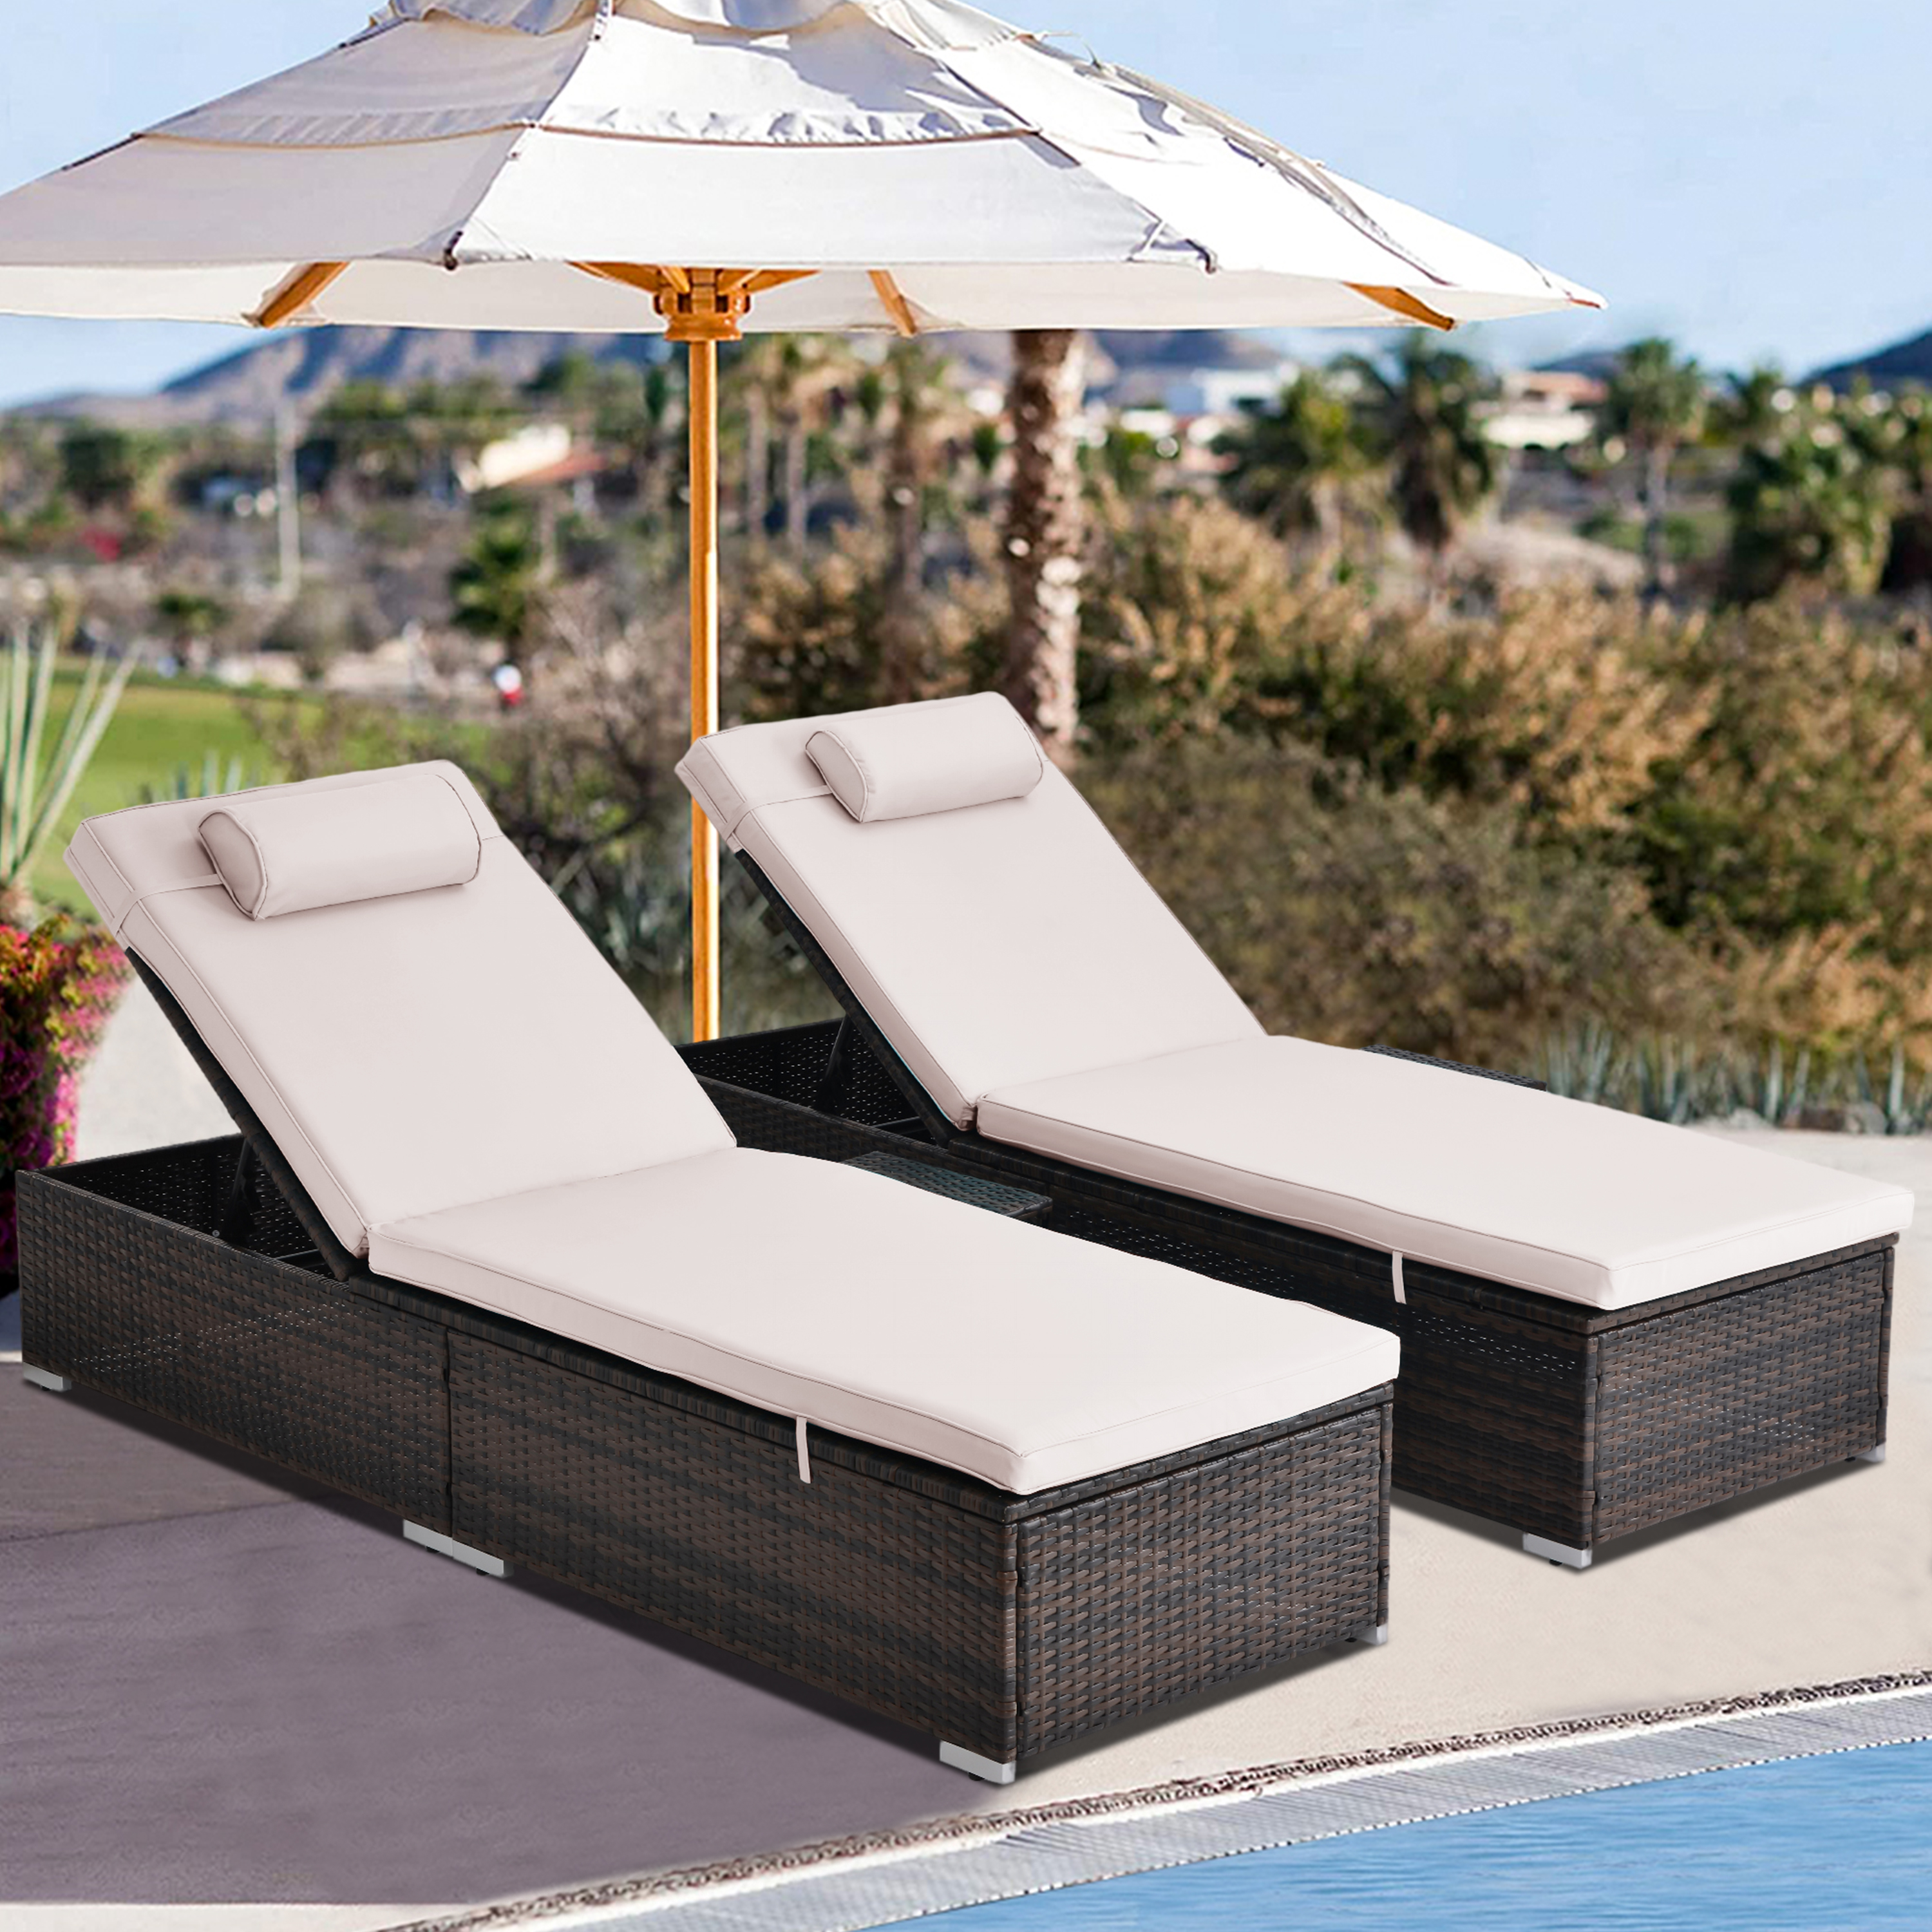 Segmart Outdoor Patio Chaise Lounge Chairs Furniture Set, PE Rattan Wicker Beach Pool Lounge Chair with Side Table, Adjustable 5 Position, Reclining Chaise Chairs, Beige, SS2350 - image 2 of 8